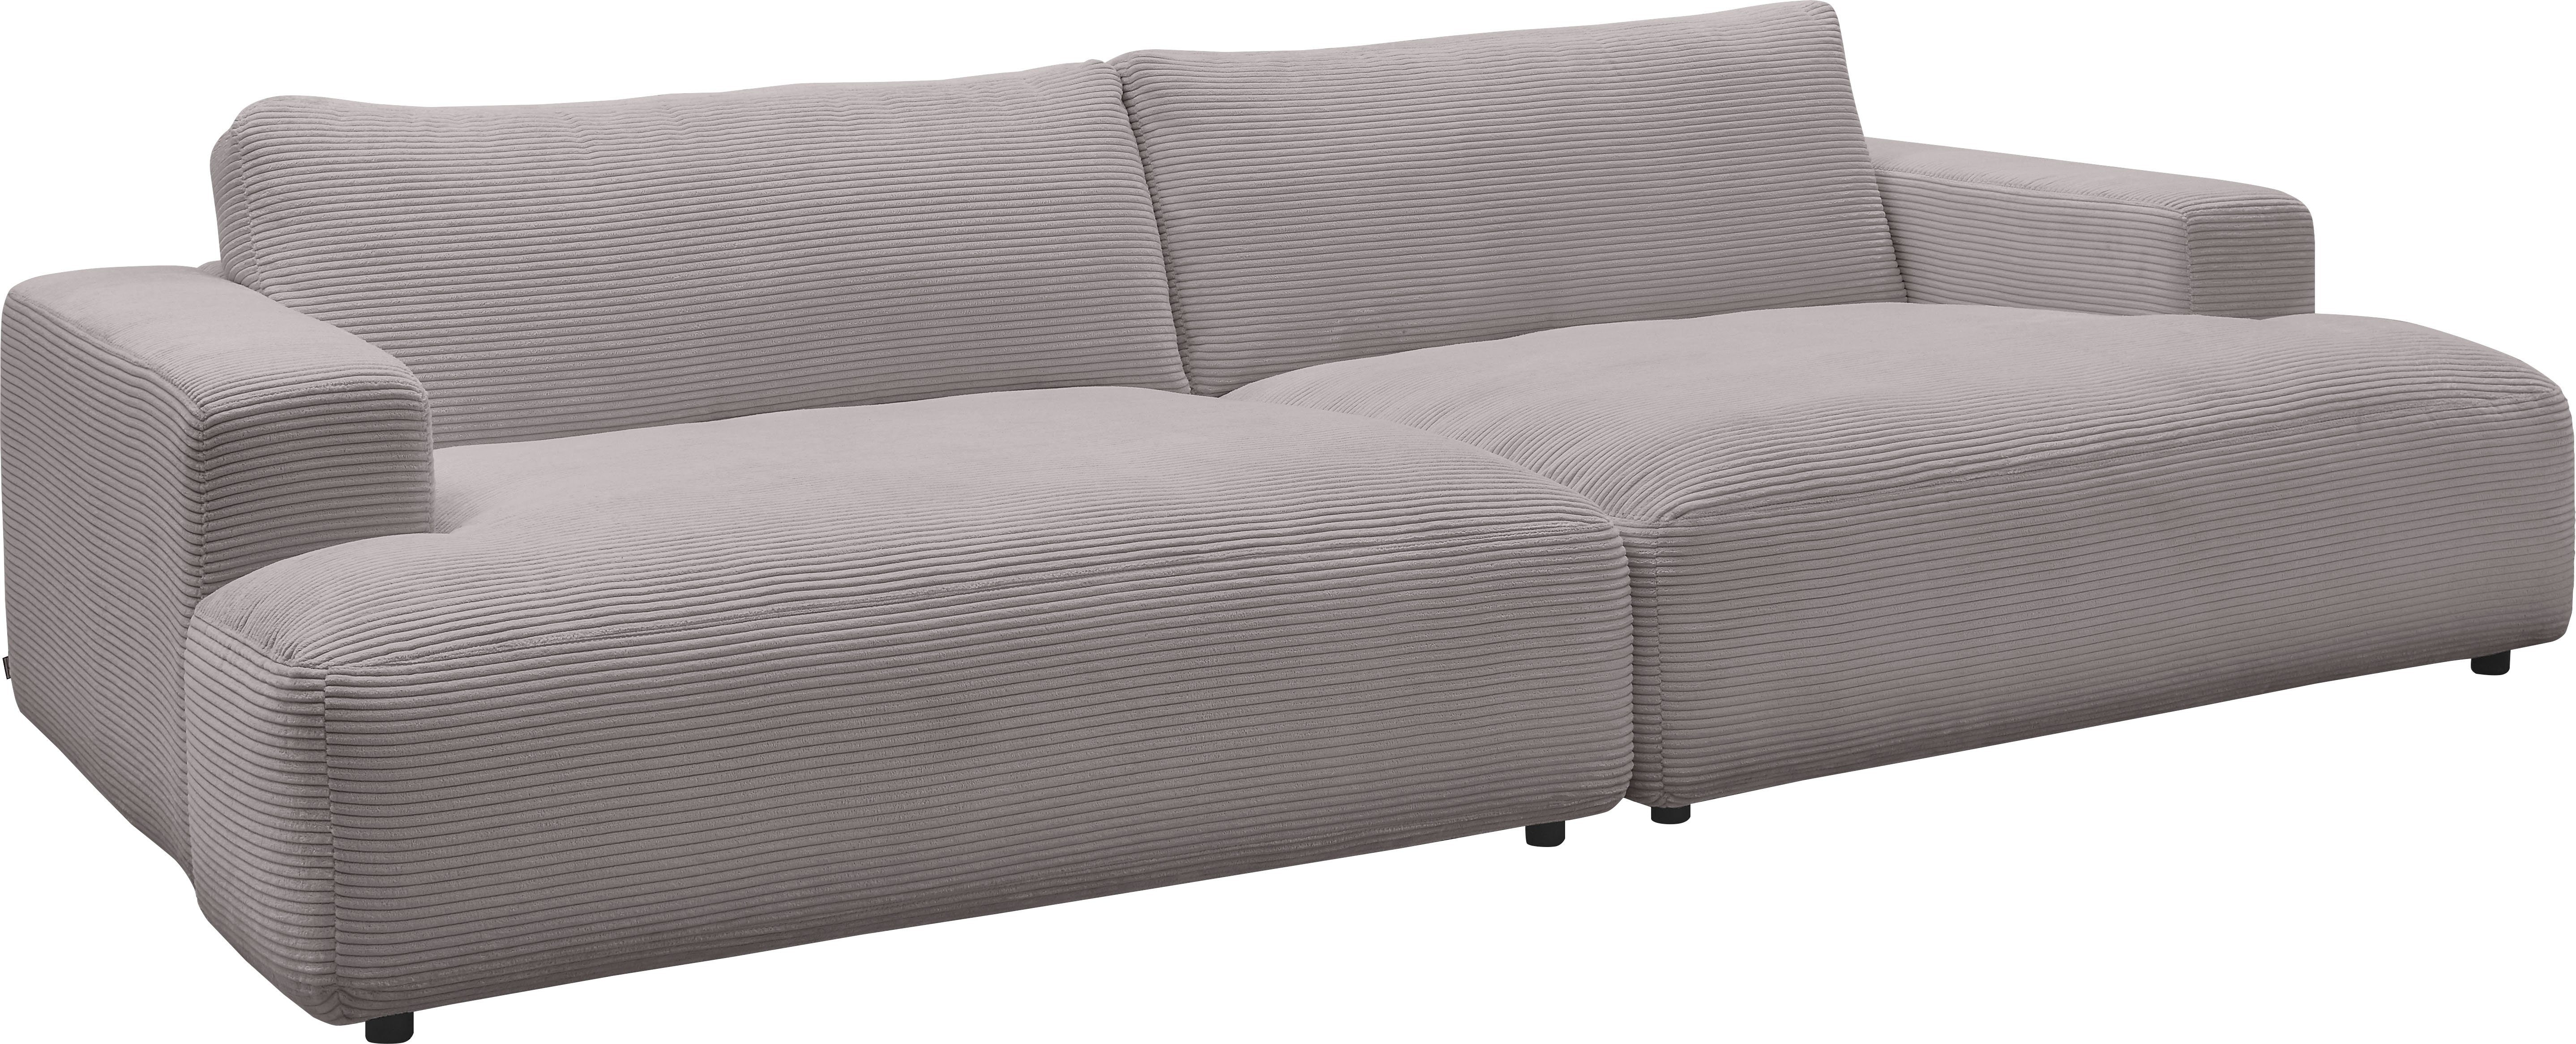 GALLERY M branded by Breite Cord-Bezug, 292 Loungesofa Lucia, Musterring cm grey